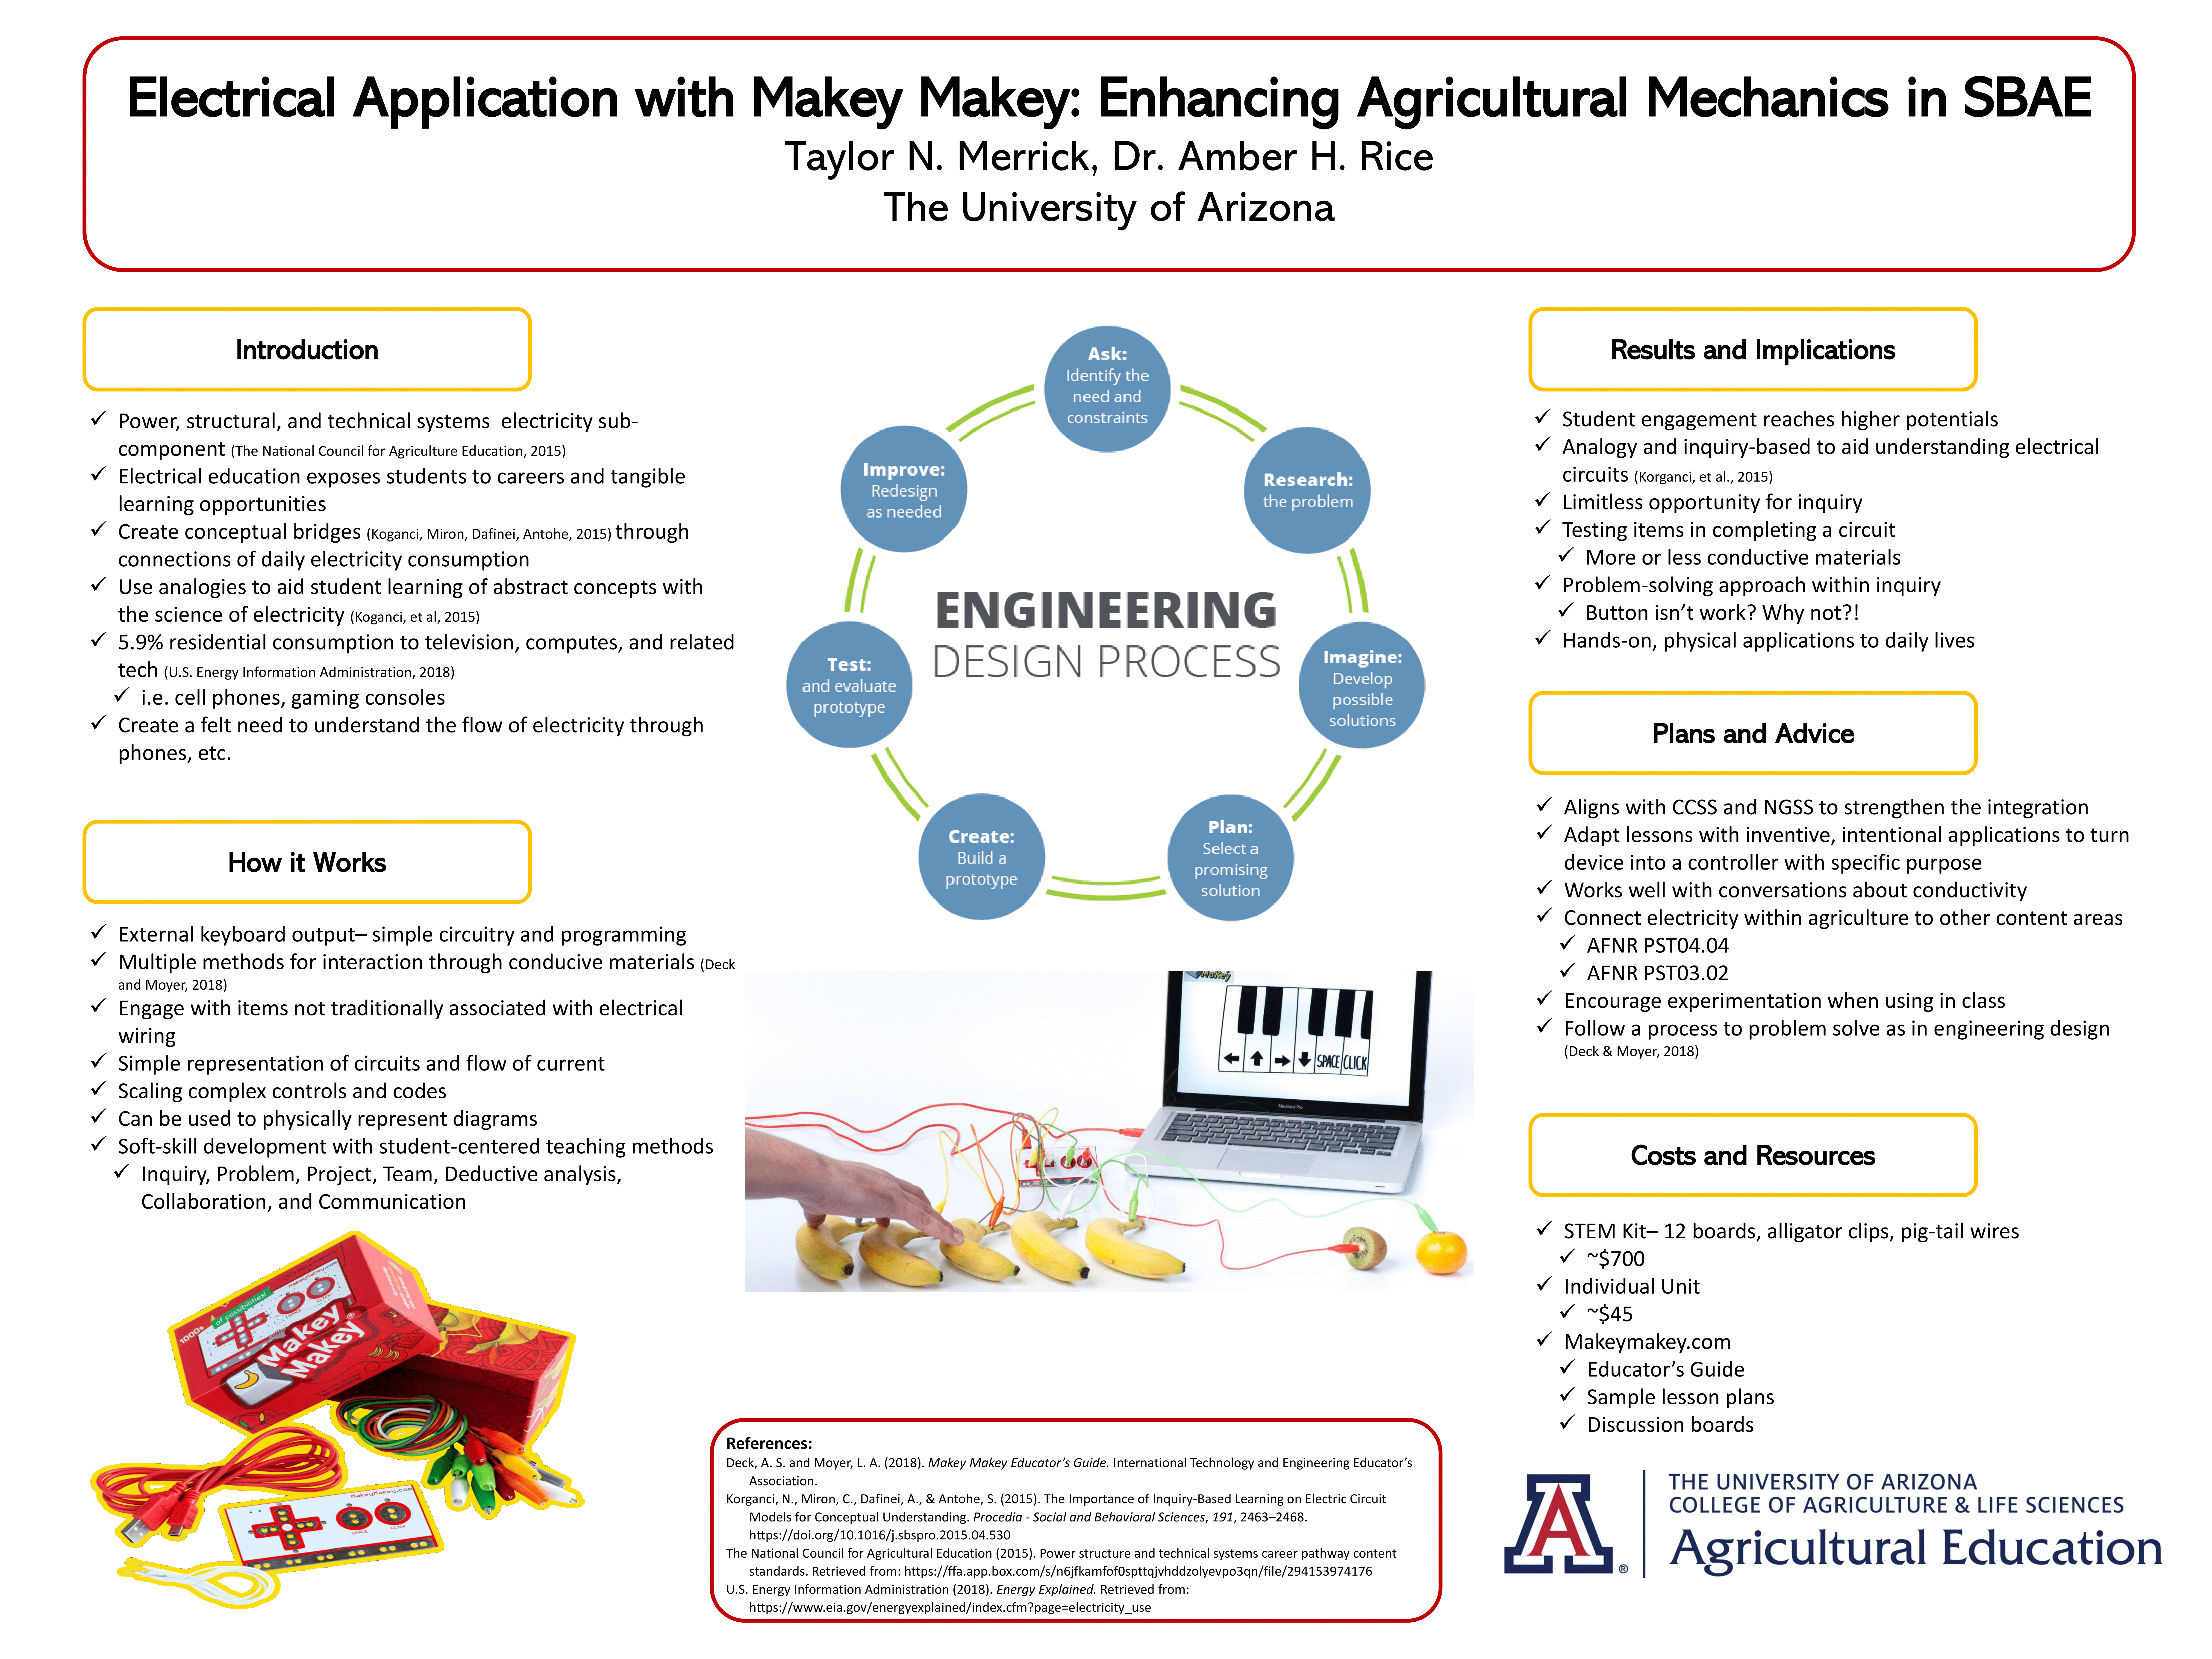 Taylor Merrick's Research Poster 